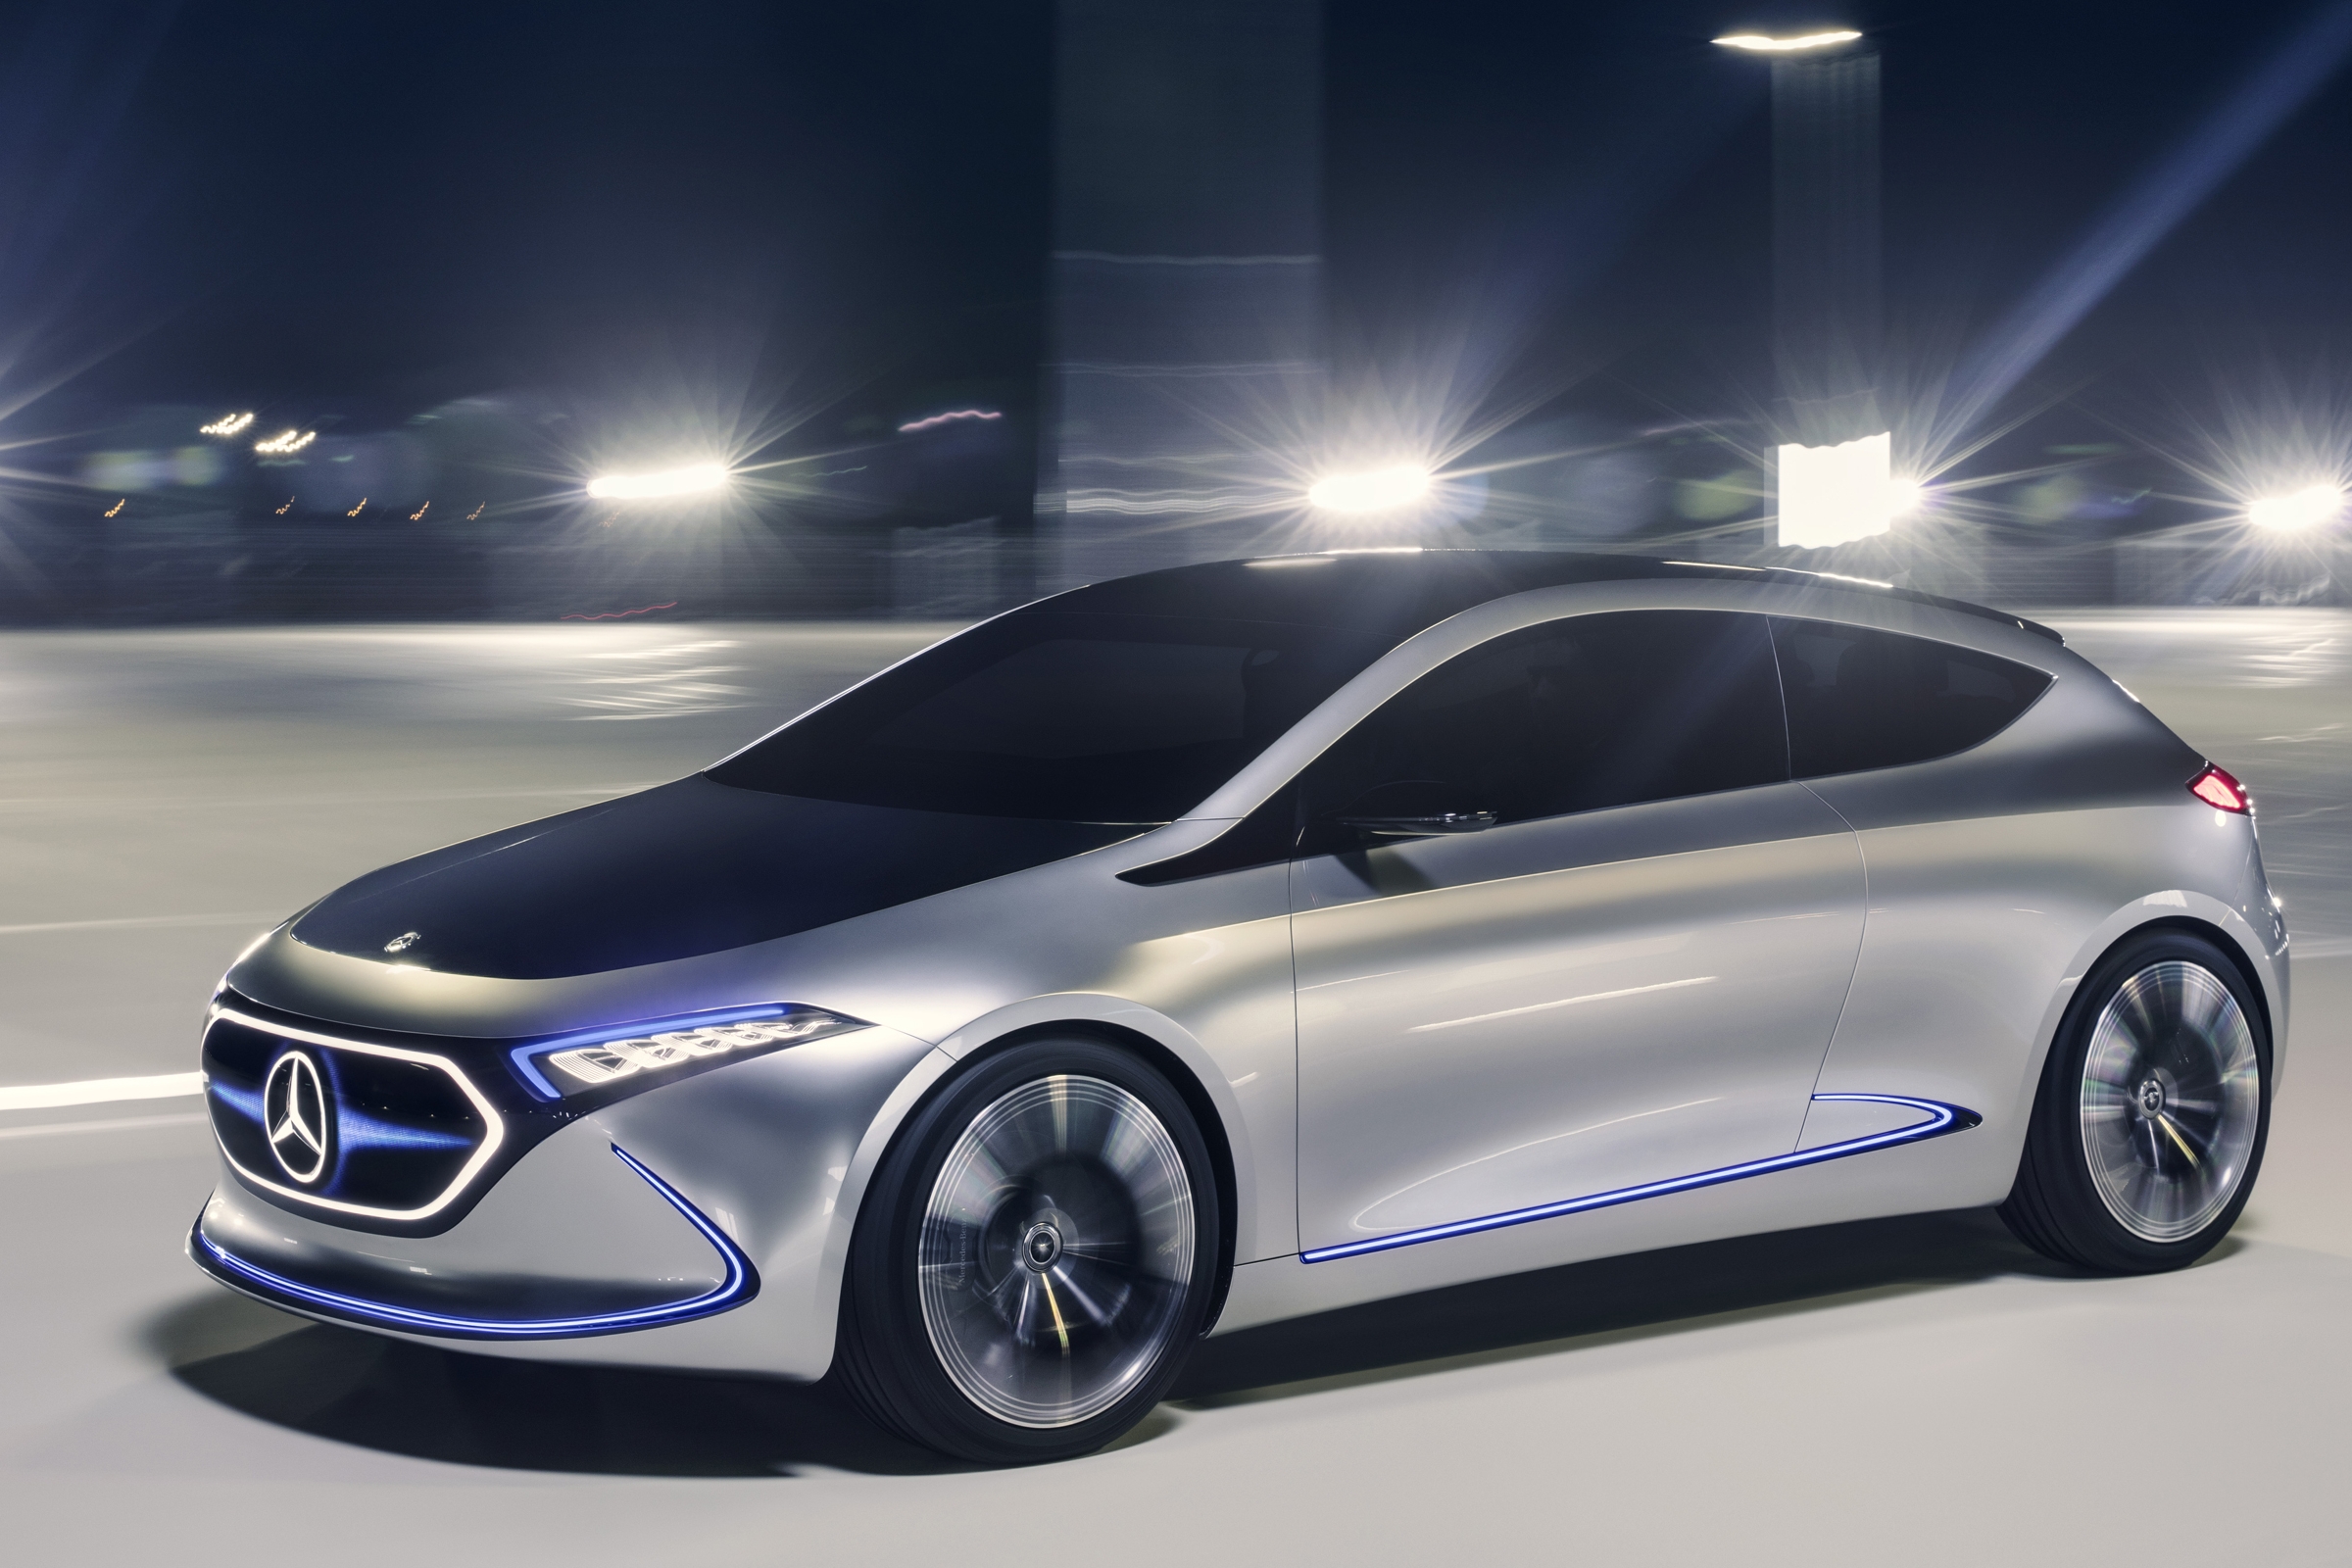 Latest Electric Cars News Six New Electric Cars Coming For 2018 And 2019